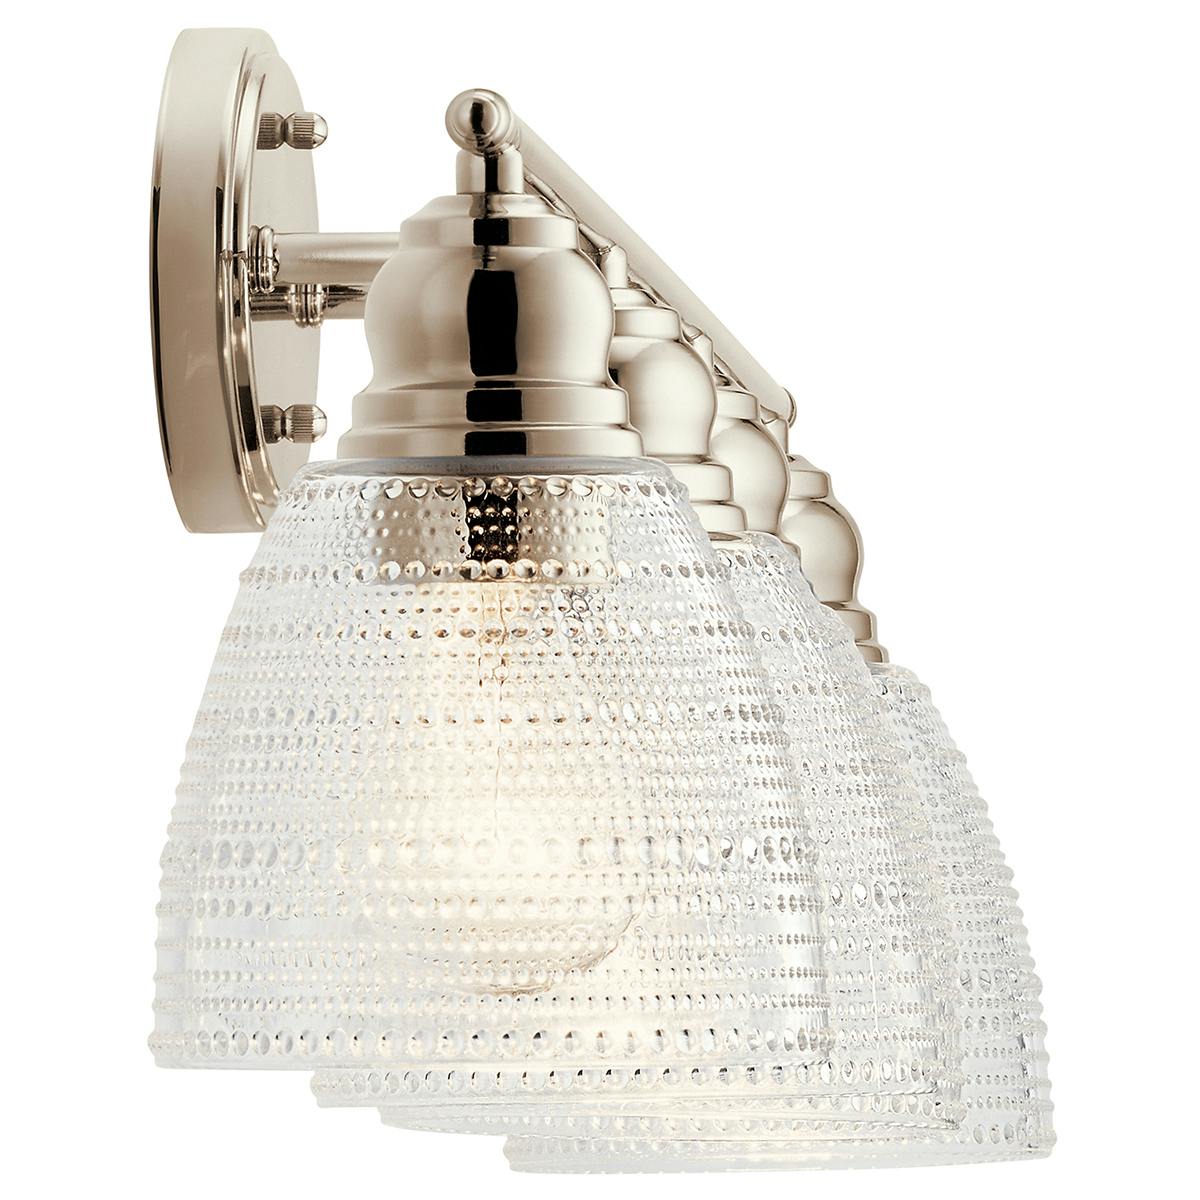 Profile view of the Karmarie 4 Light Vanity Light Nickel on a white background